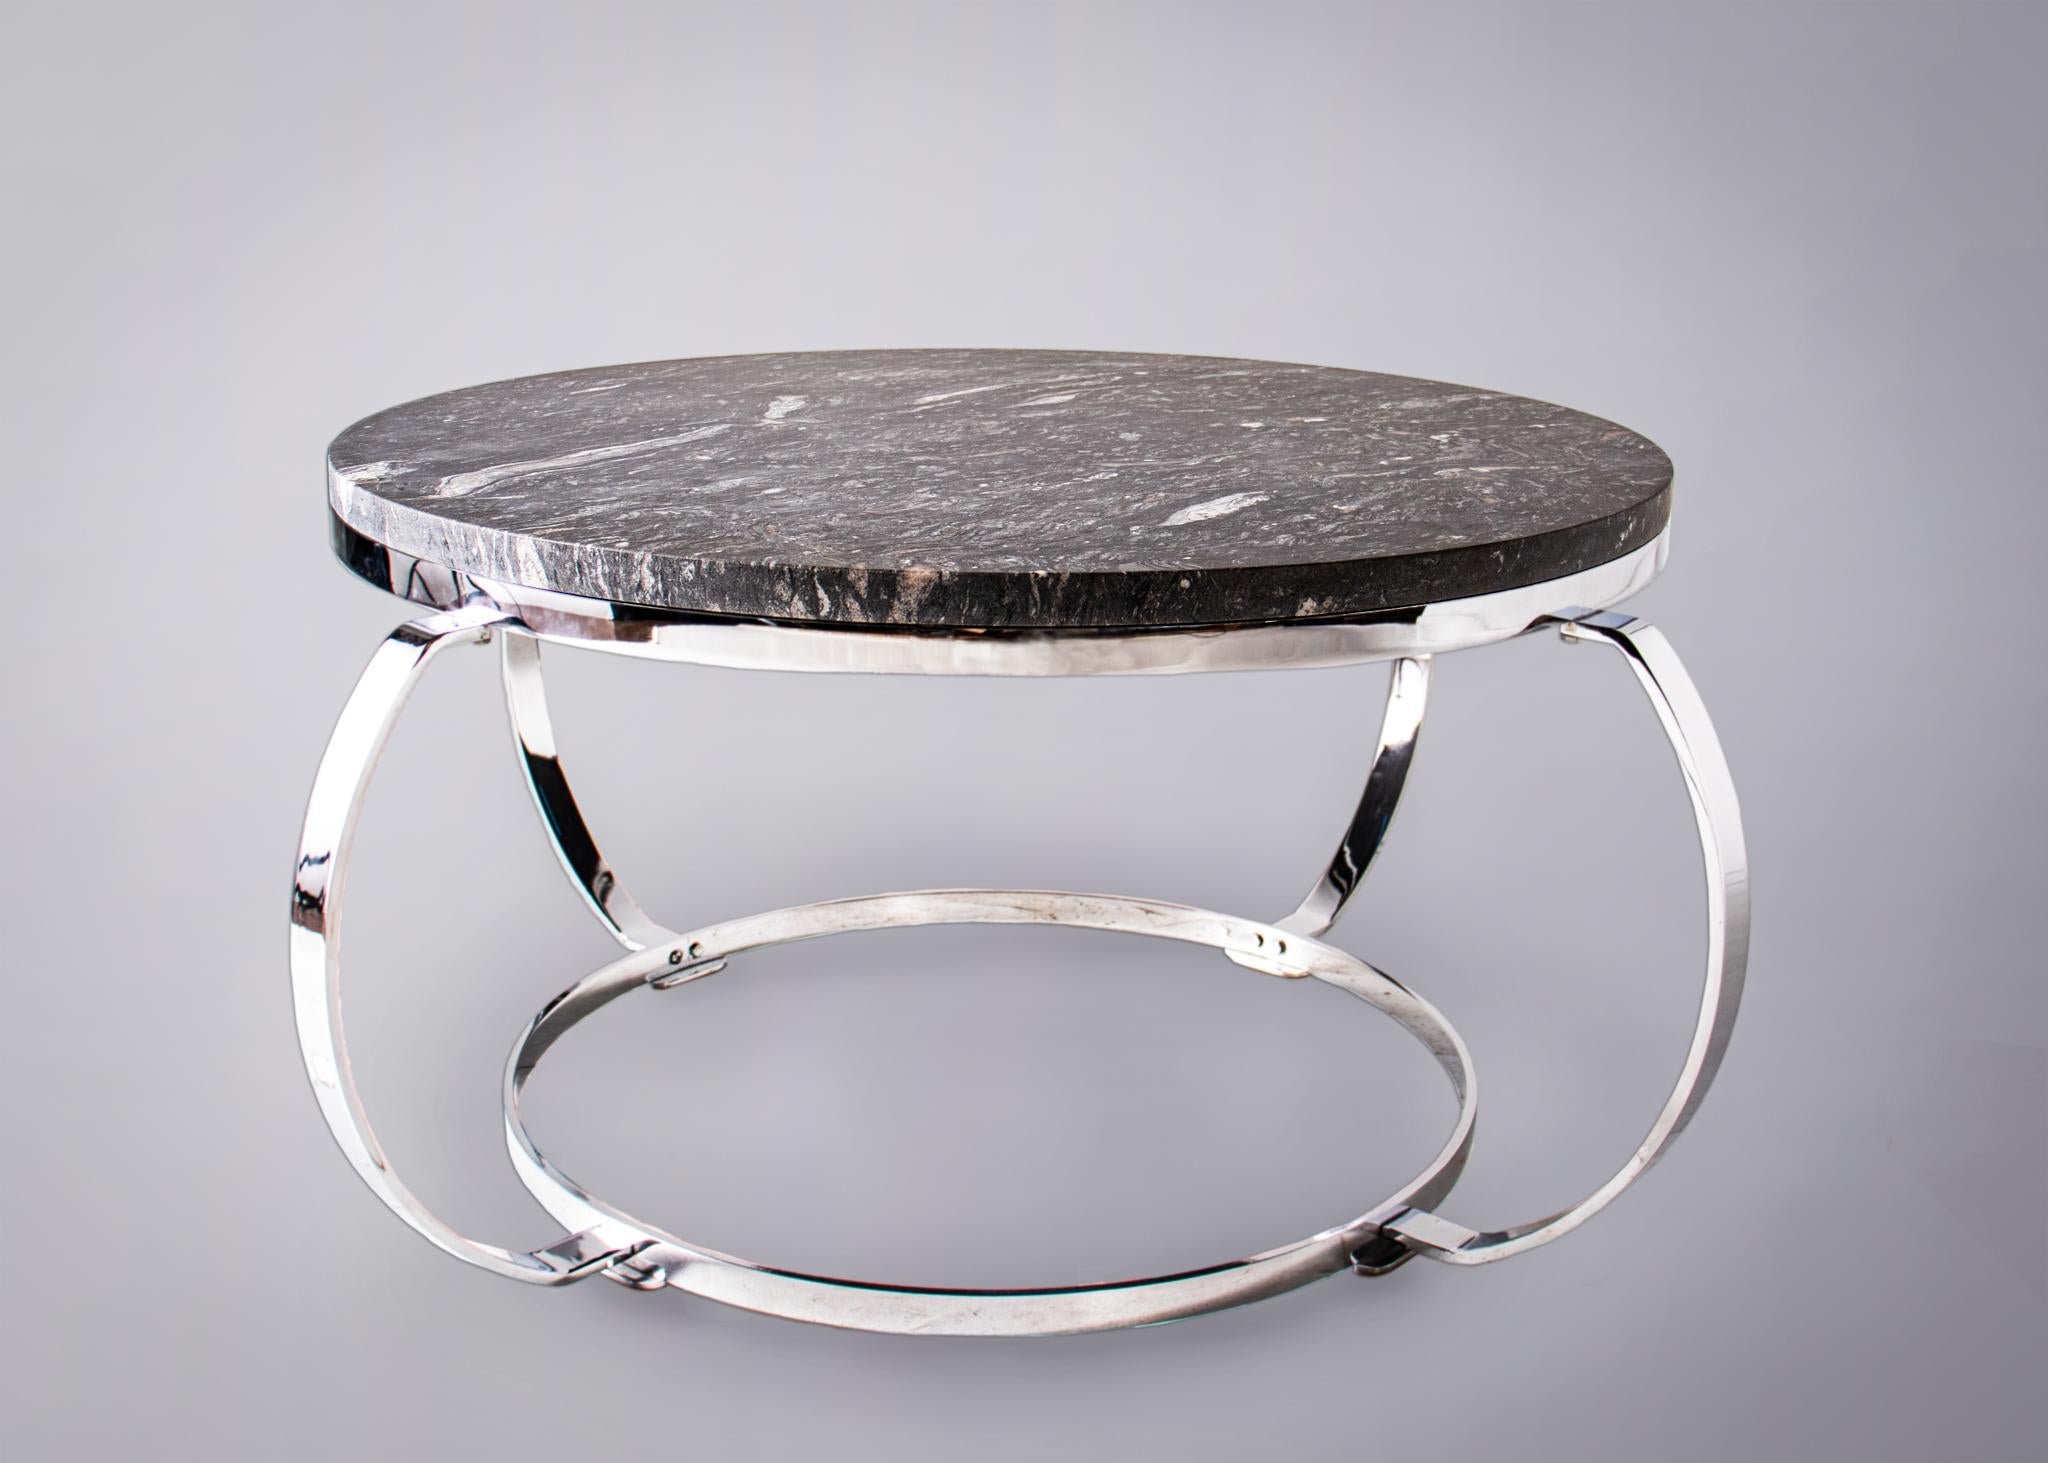 French Cheyenne Marble Coffee Table with Rounded Chrome Base